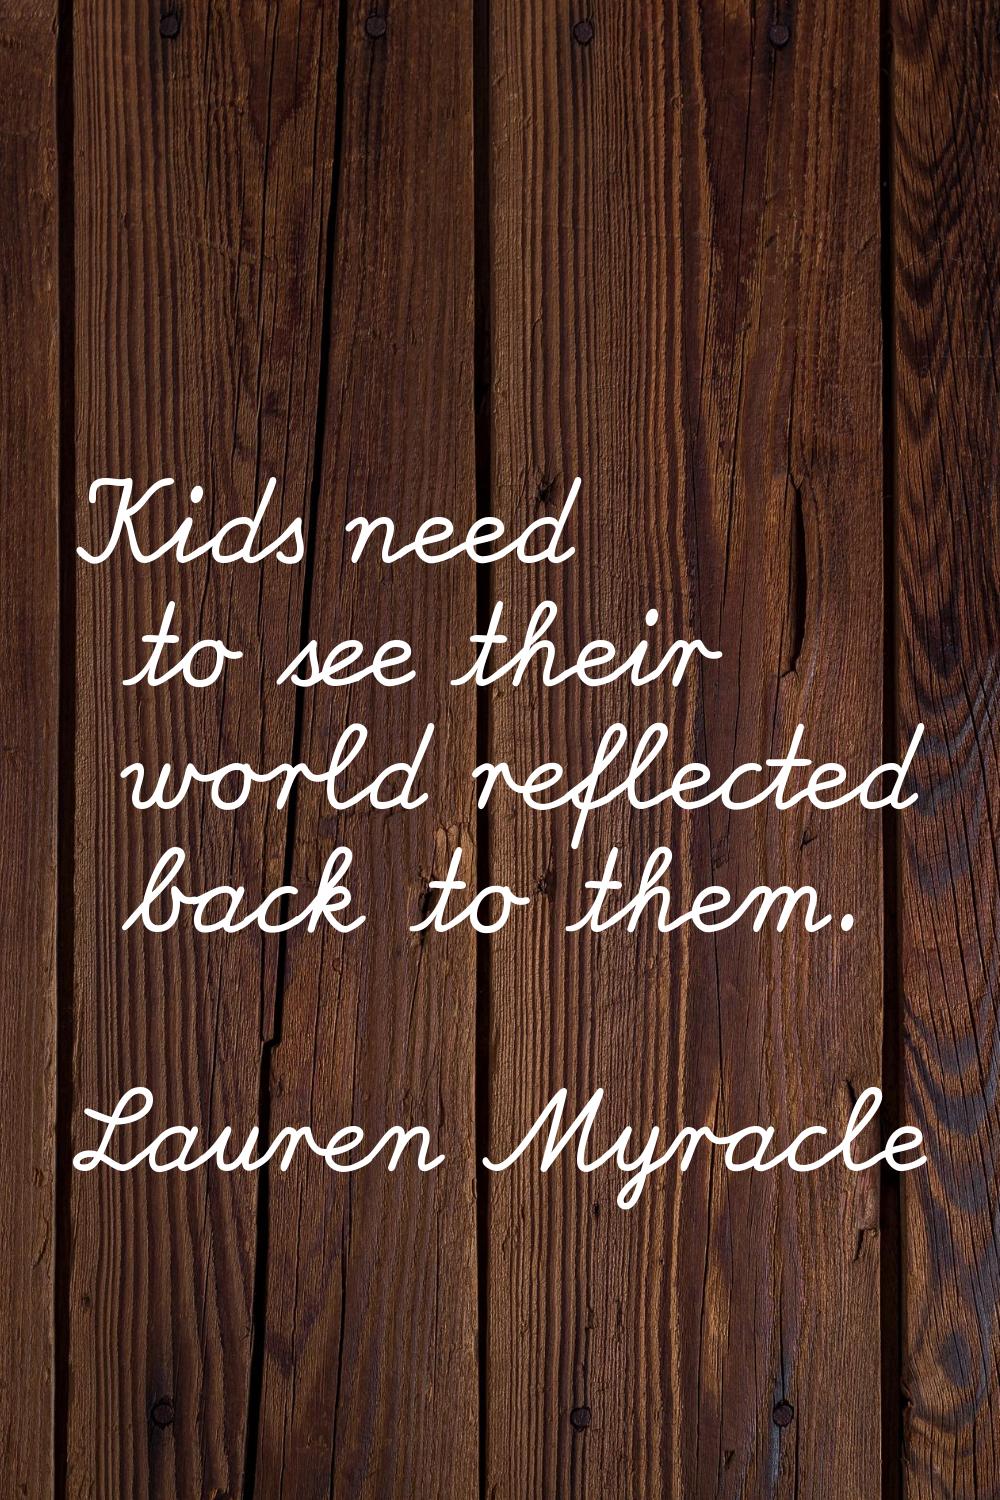 Kids need to see their world reflected back to them.